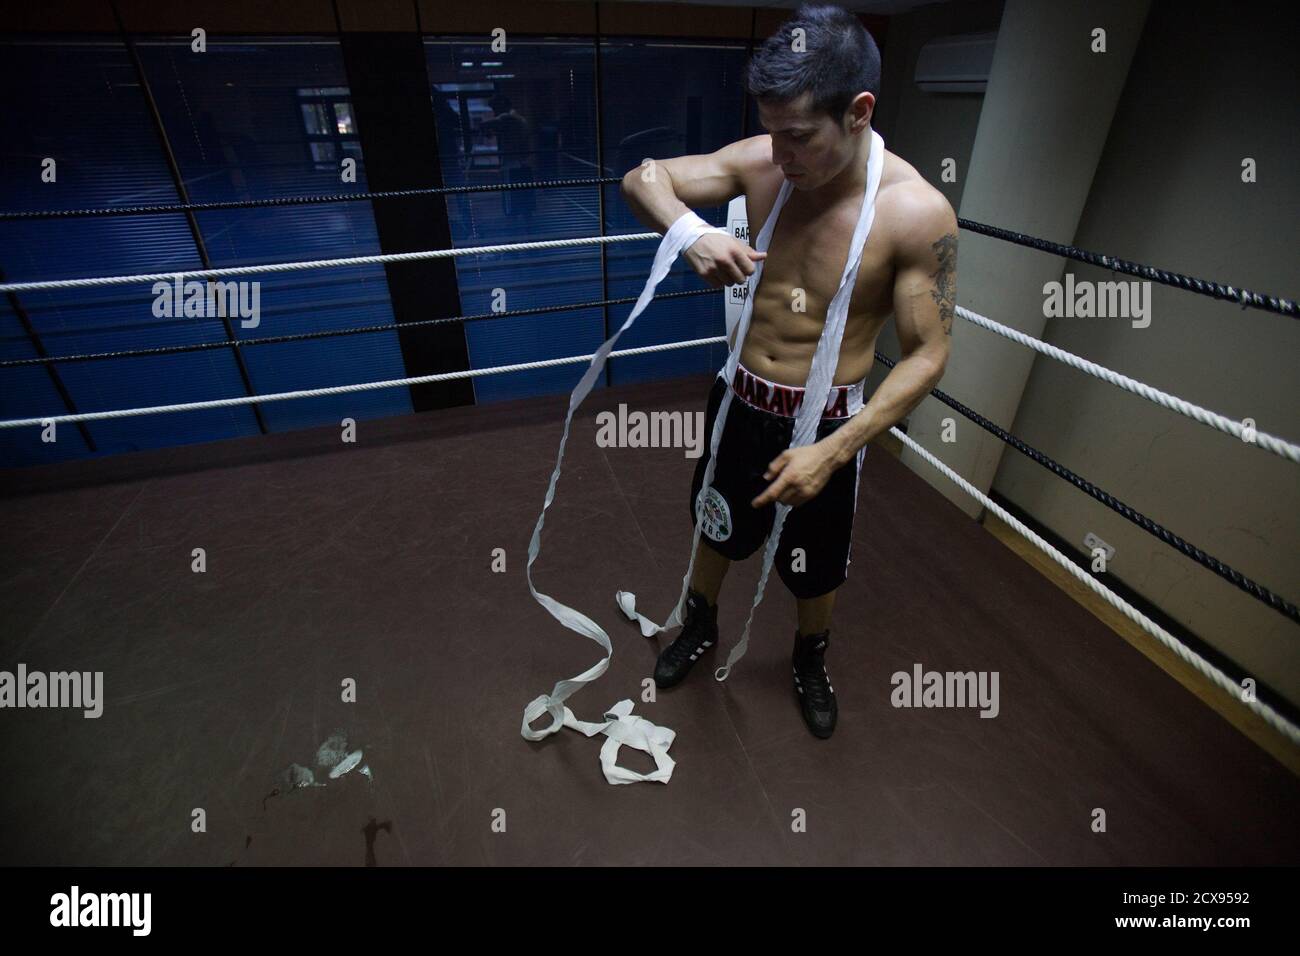 Middleweight champion Sergio Martinez from Argentina removes hand tape  after the boxing training session in Madrid November 23, 2011. Martinez  believes his most realistic chance of winning recognition as the world's  best